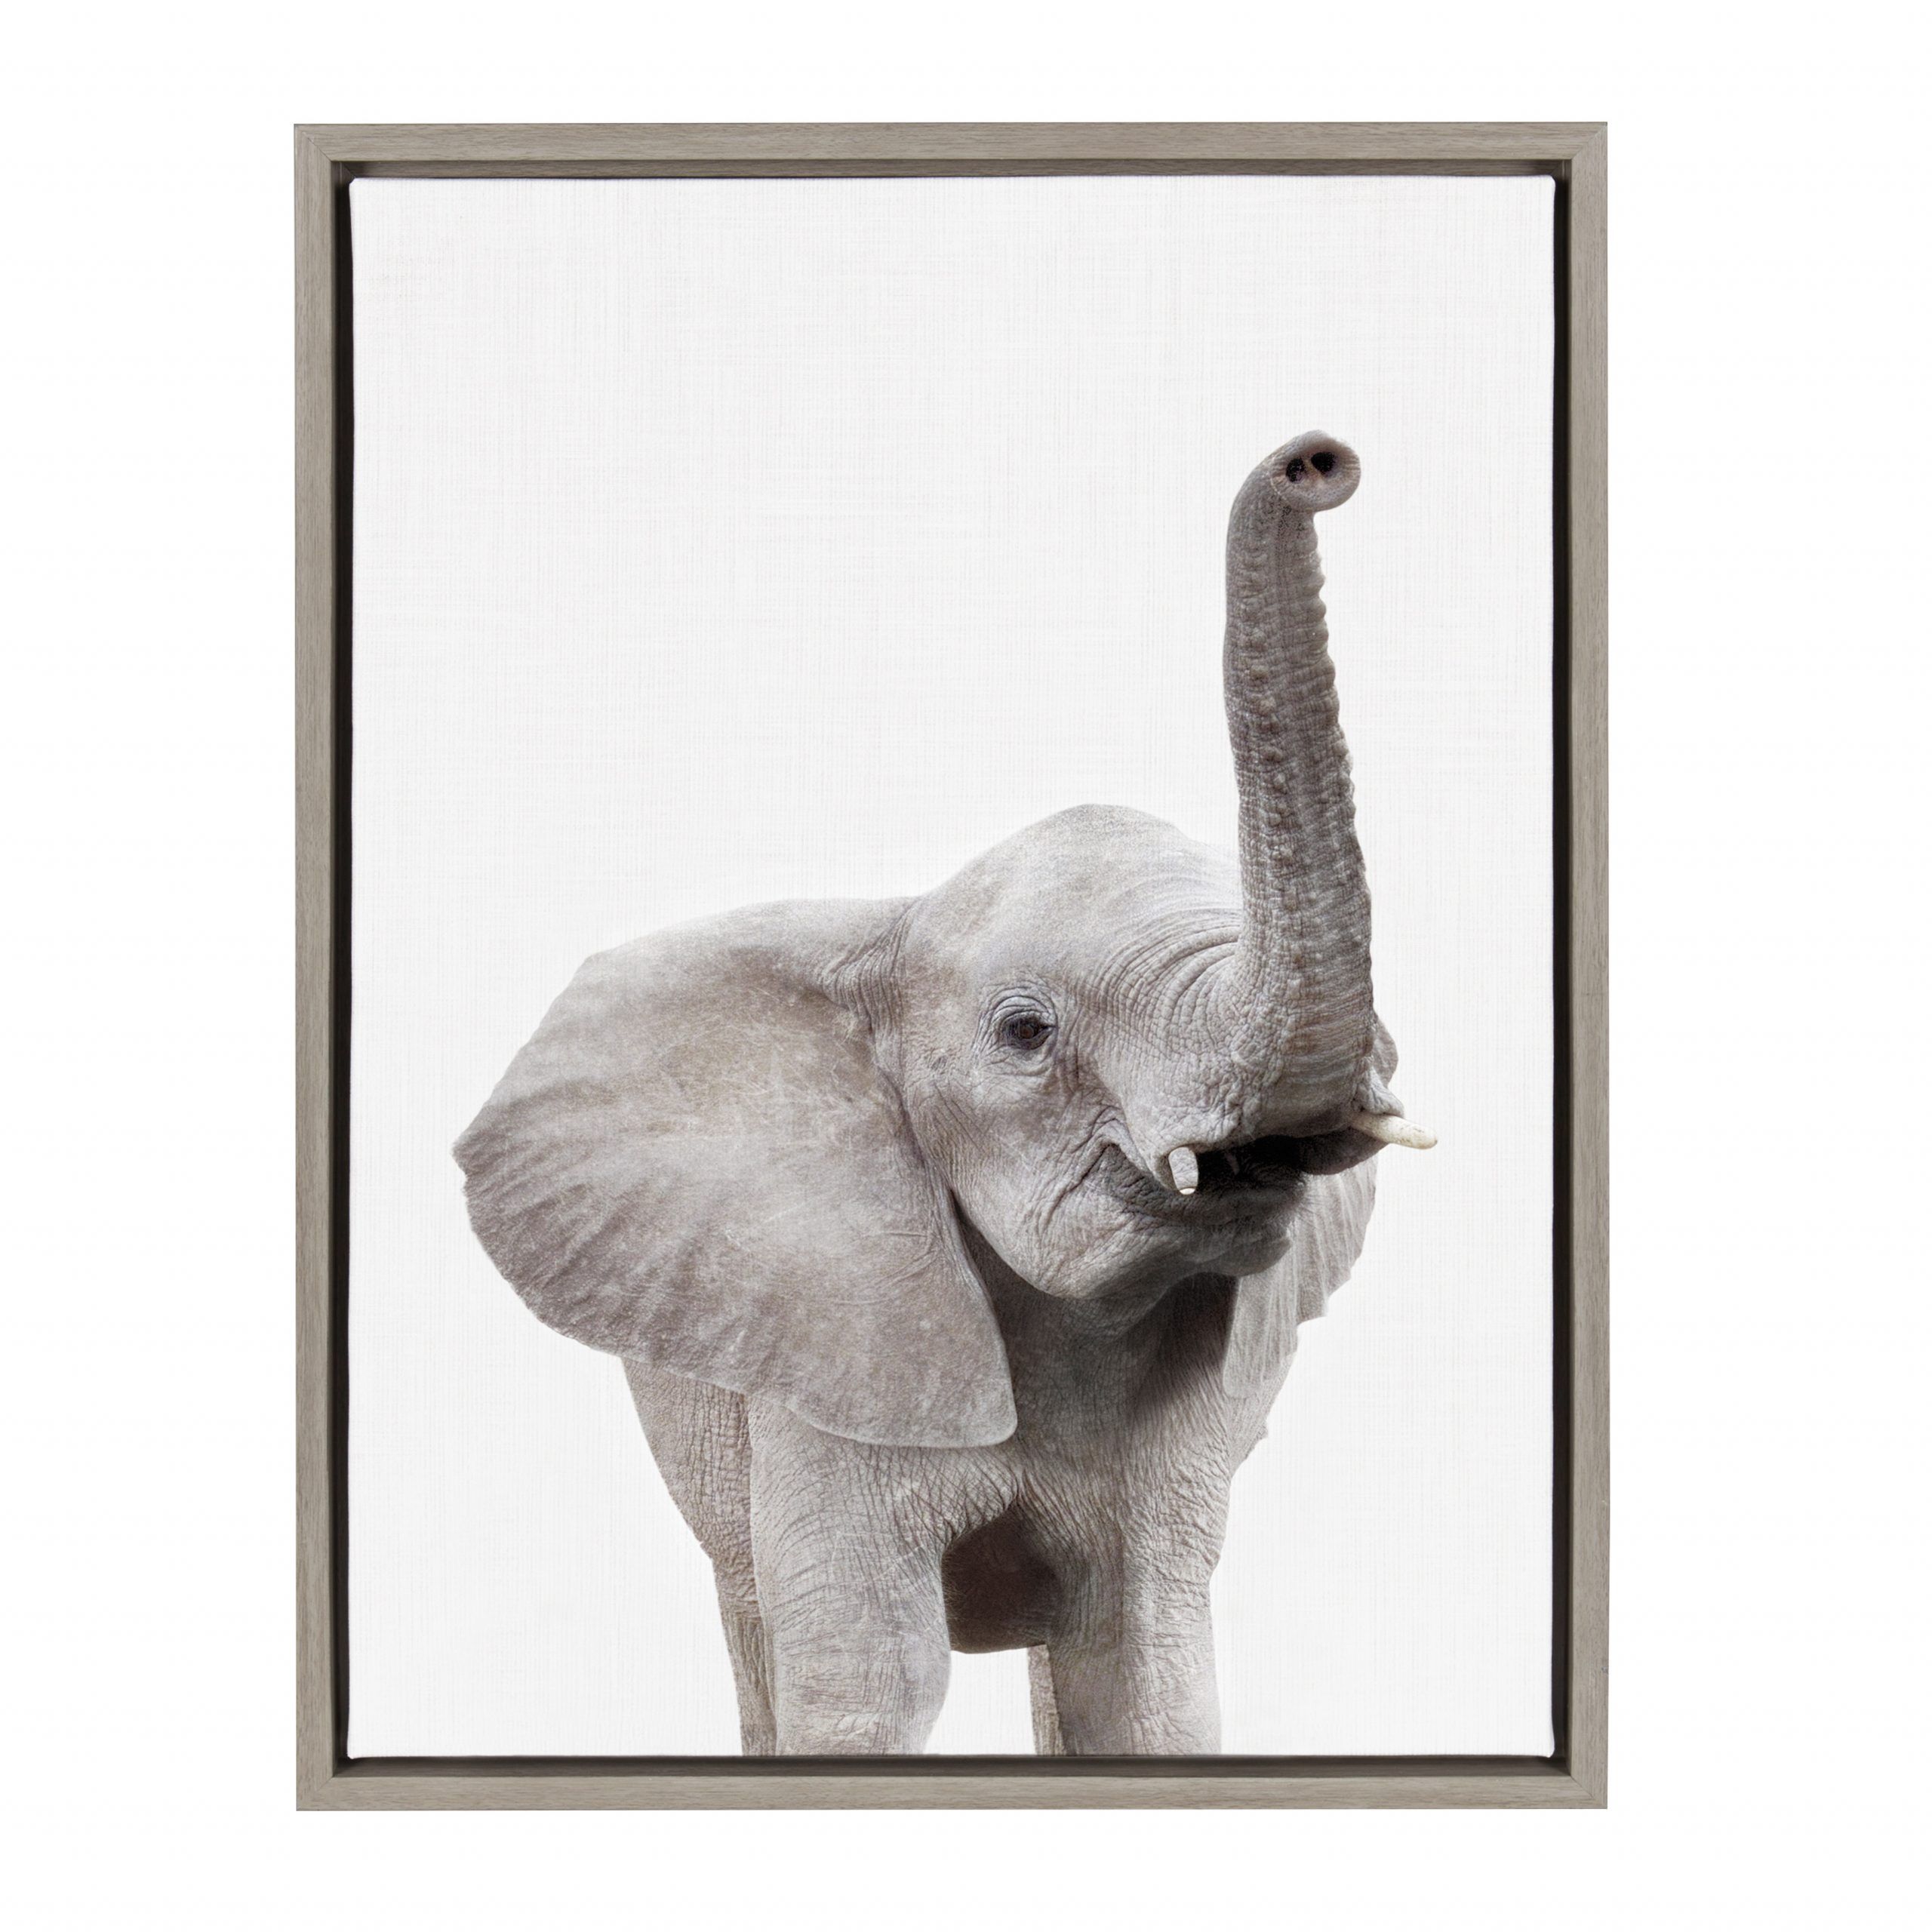 Kate And Laurel Sylvie Elephant With Raised Trunk Animal Print Portrait For 2018 Elephants Wall Art (View 9 of 20)